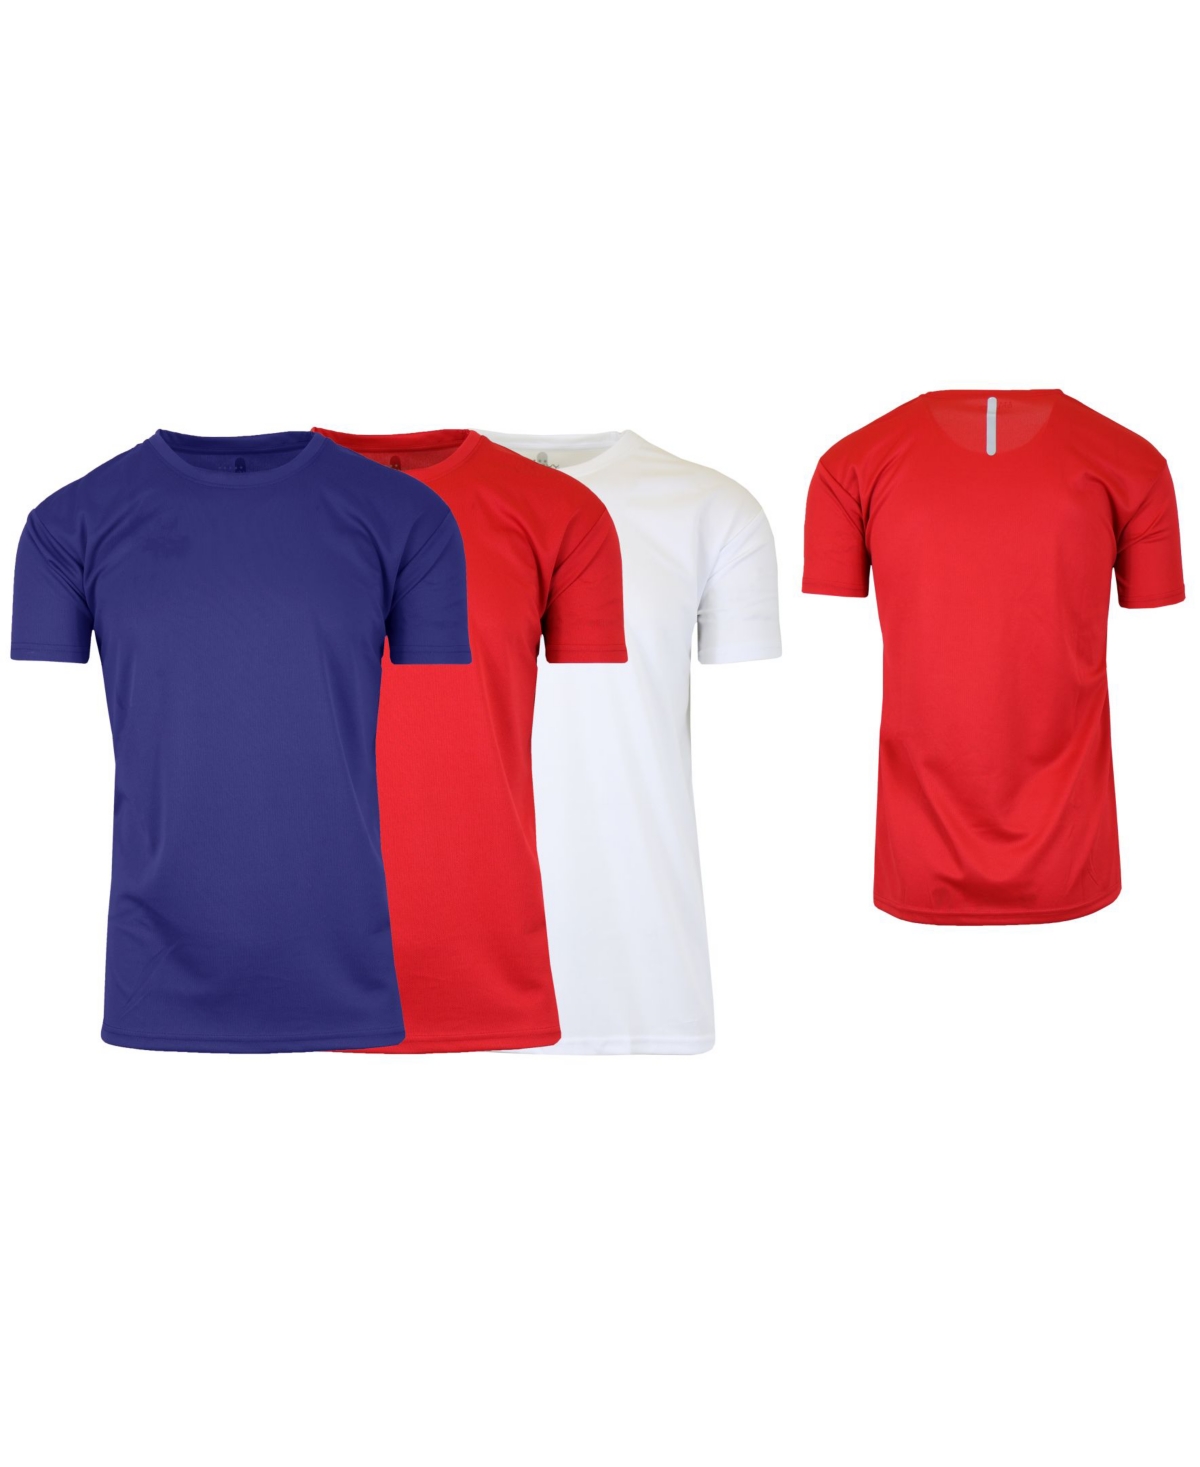 Galaxy By Harvic Men's Short Sleeve Moisture-wicking Quick Dry Performance Tee, Pack Of 3 In Navy,red,white